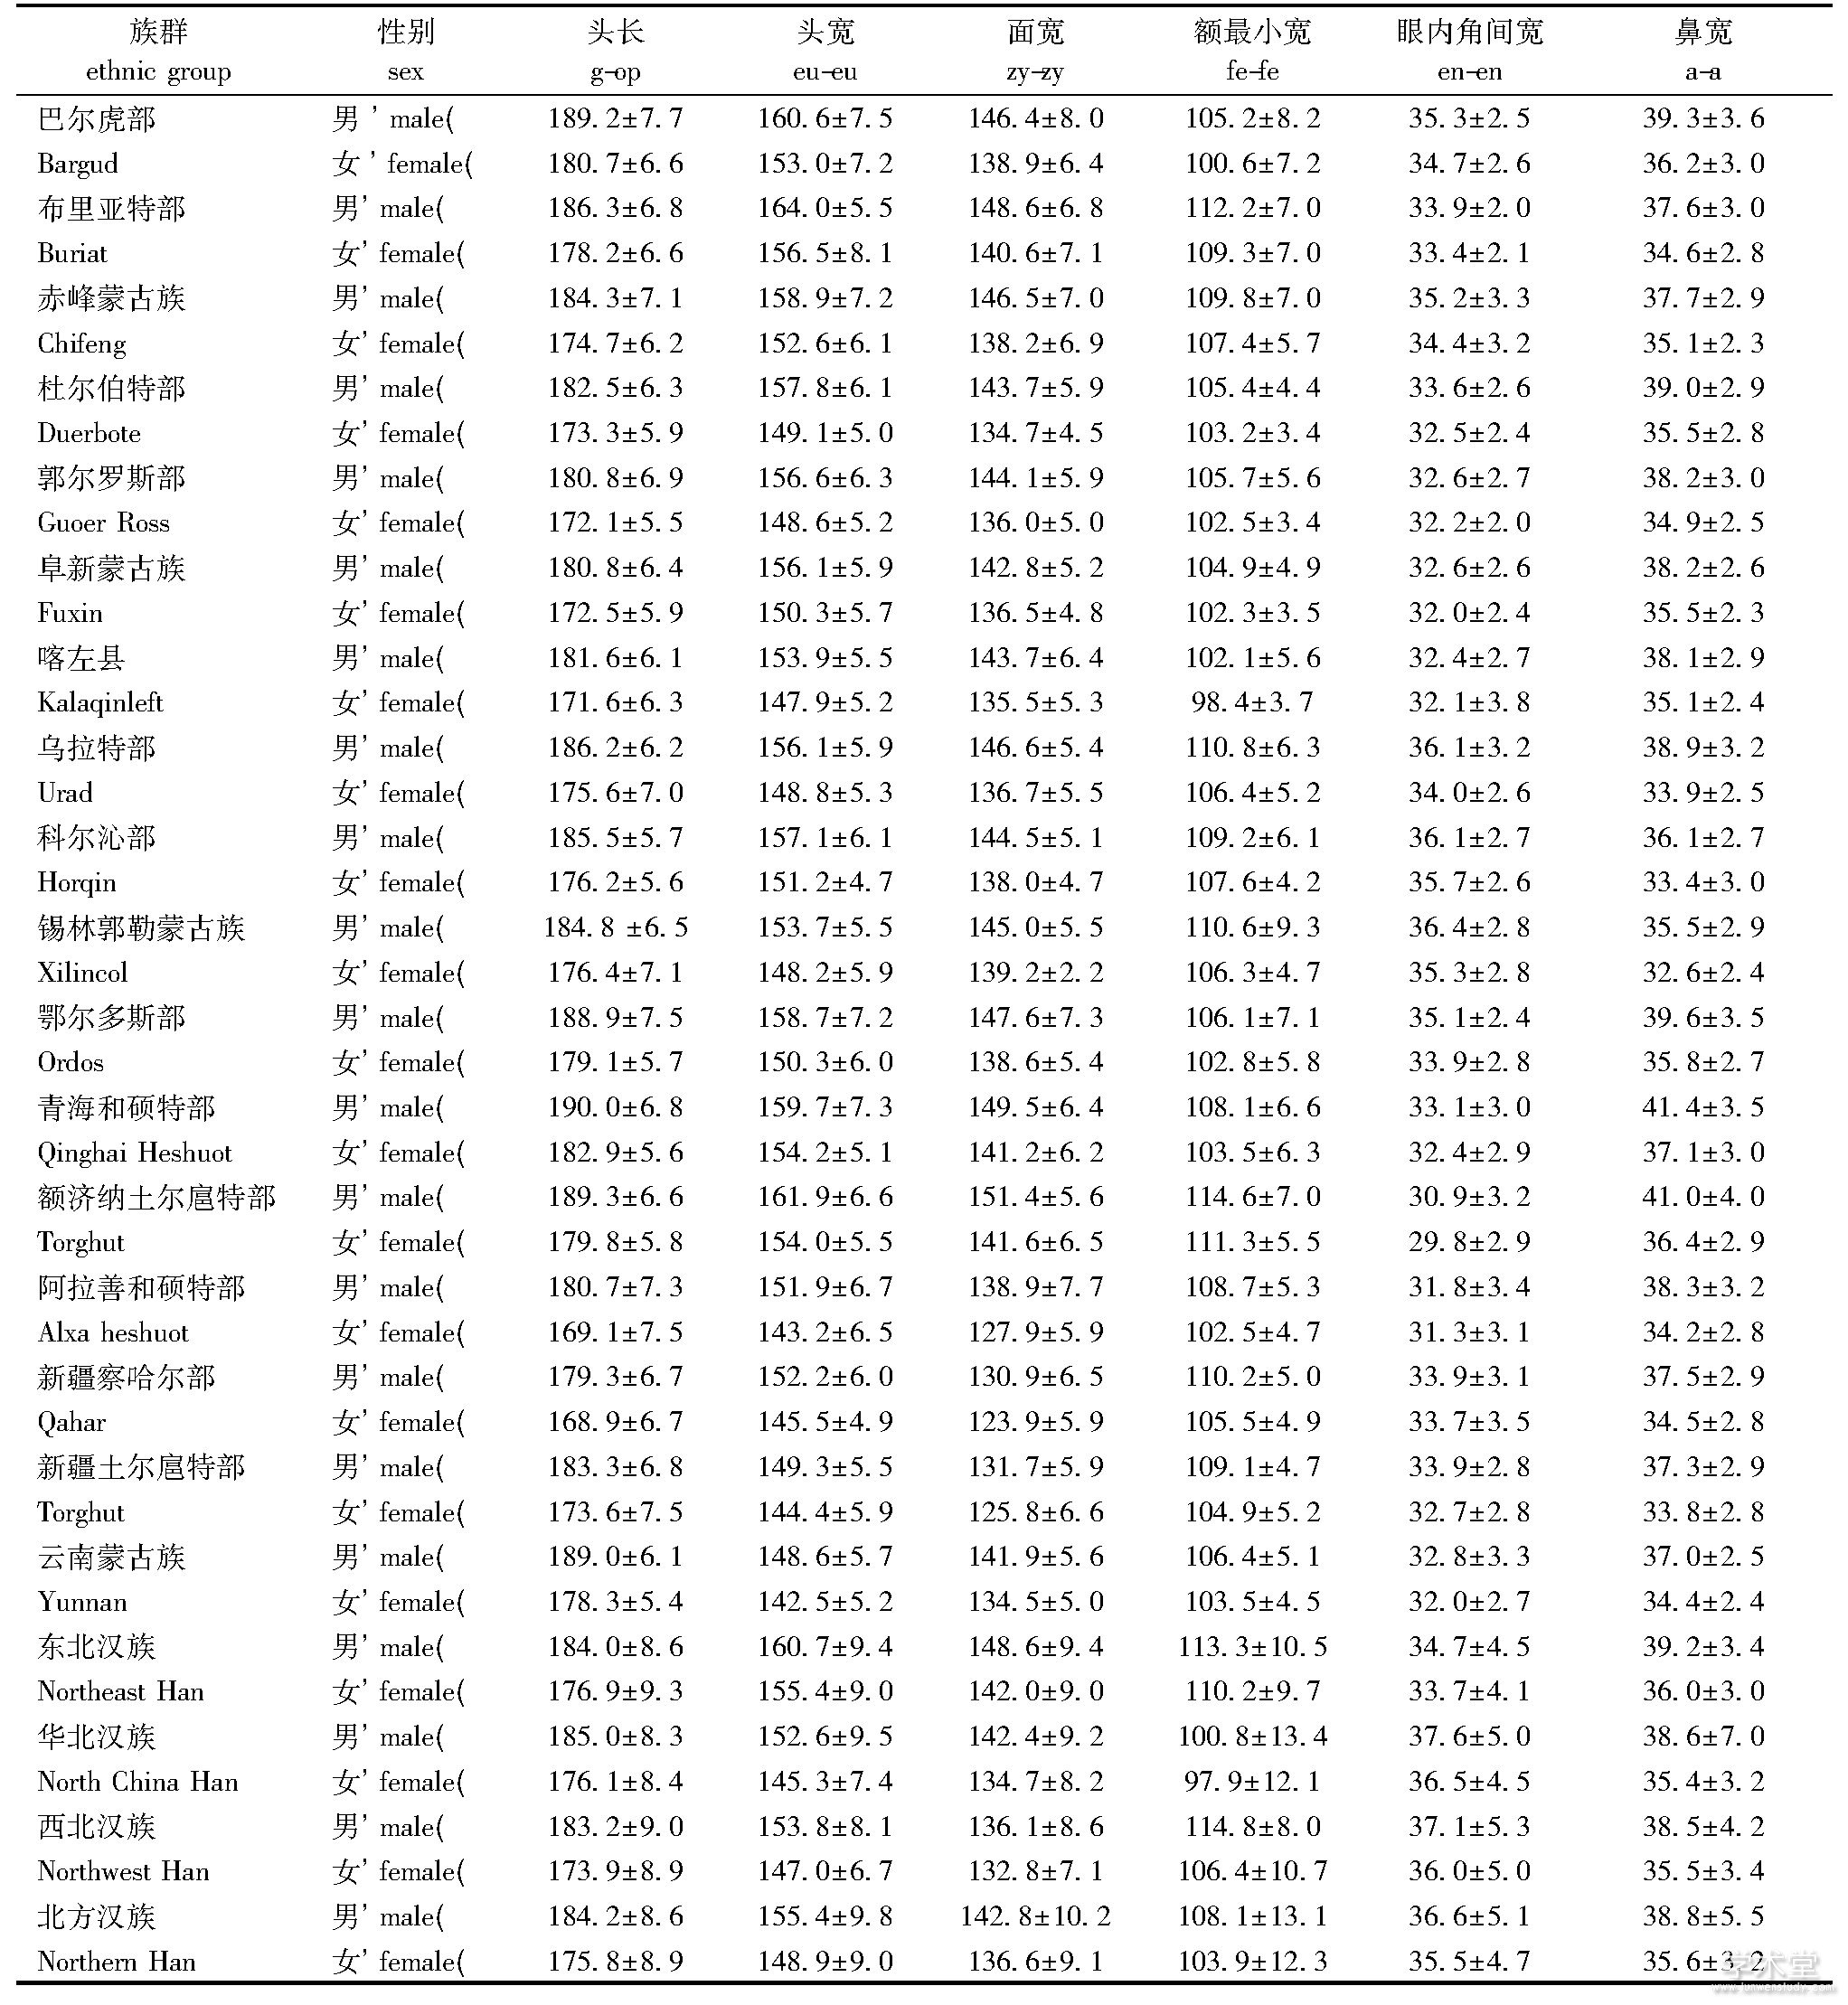 1 ɹ17Ⱥͷ6ֵָ (mm) Table 1 Mongolian 17 ethnic groups of head length etc 6 average indexes (mm)